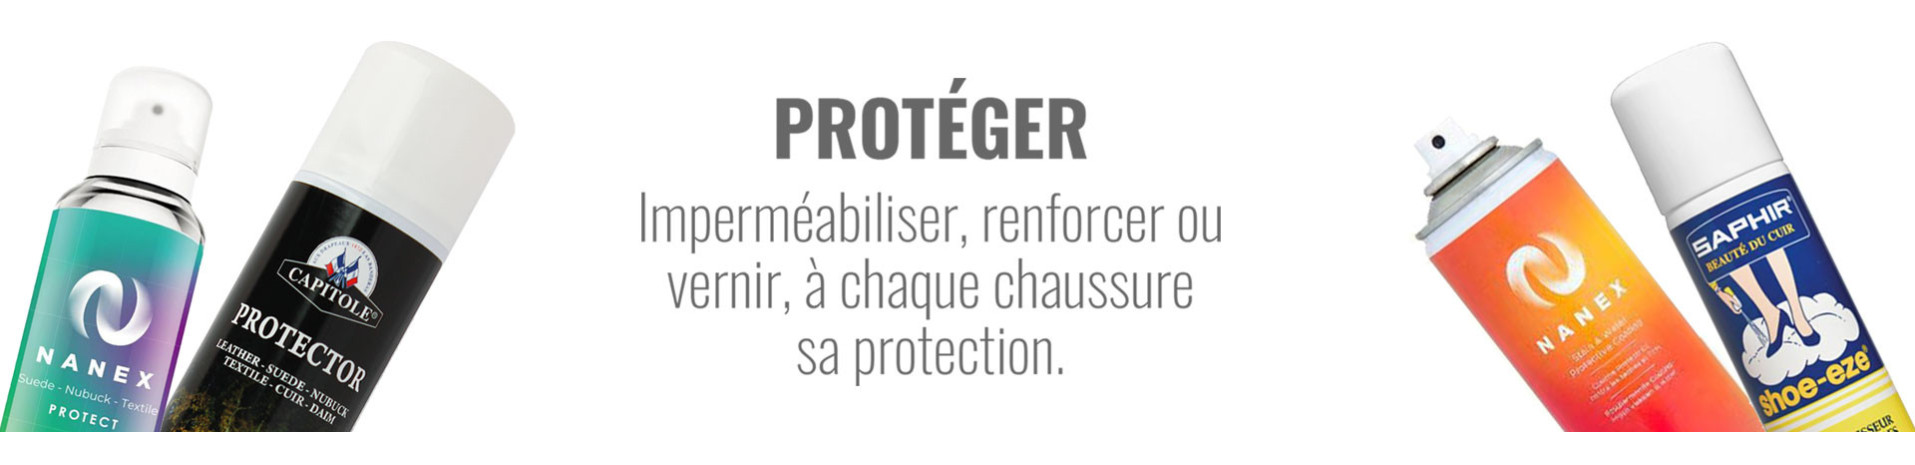 PROTEGER